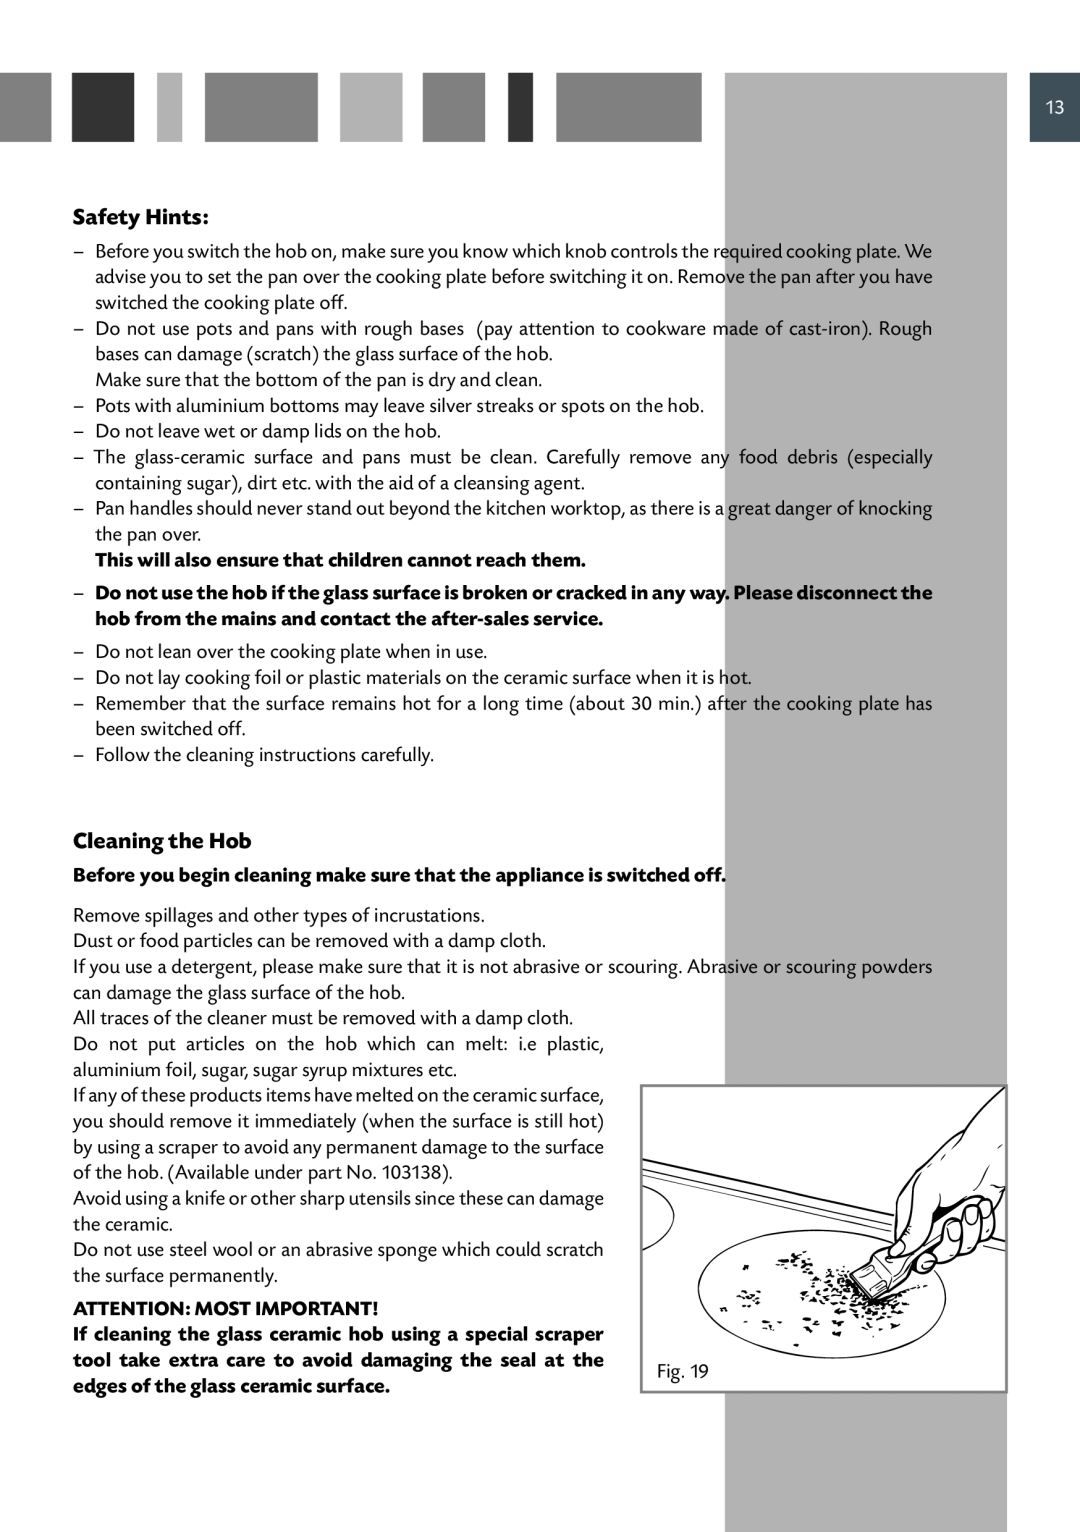 CDA RC 9620 manual Safety Hints, Cleaning the Hob, This will also ensure that children cannot reach them 